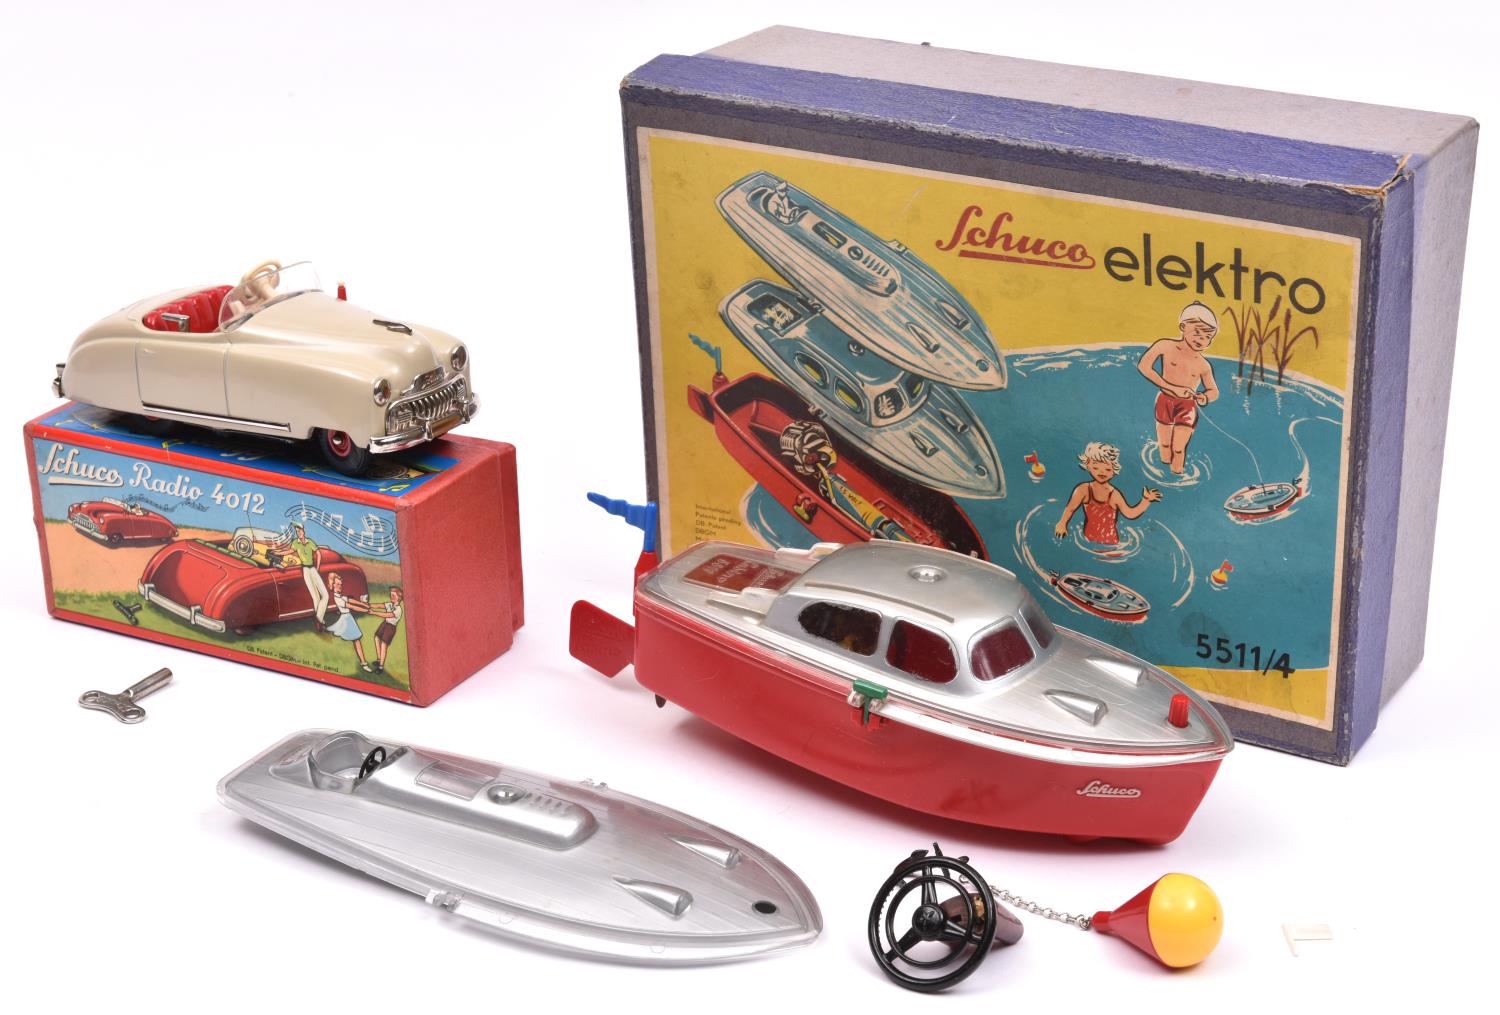 2 original Schuco Toys. An Elektro 5511/4. A battery powered boat with two interchangeable tops, one